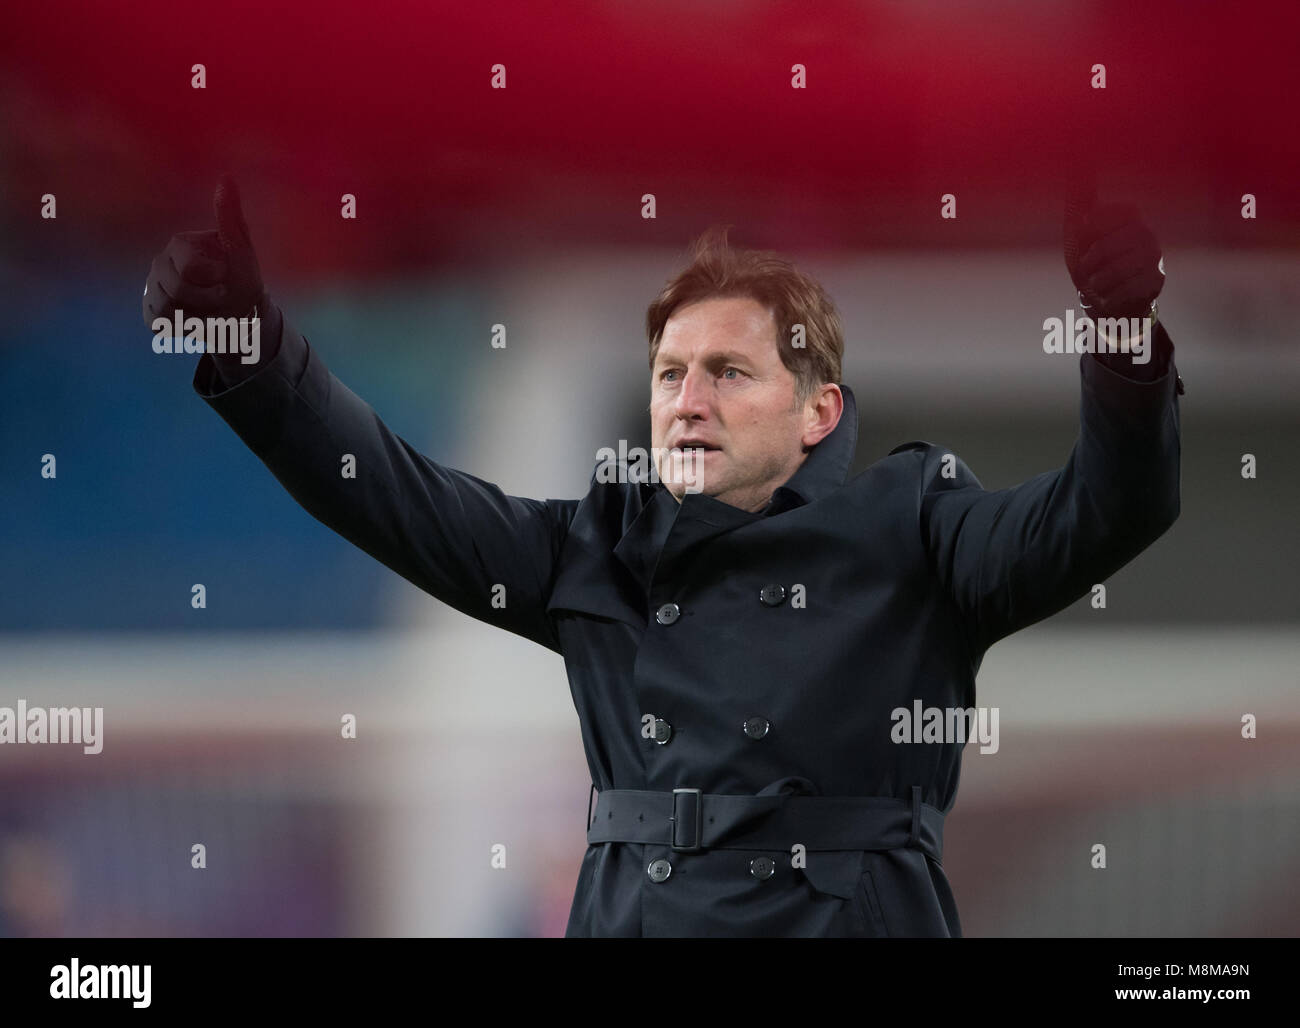 18 March 2018, Germany, Leipzig: Soccer, Bundesliga, 1. RB Leipzig vs Bayern Munich at the Red Bull Arena. Leipzig's coach Ralph Hasenhuettl waves to the fans after the final whistle. Photo: Soeren Stache/dpa - Nutzung nur nach vertraglicher Vereinbarung Stock Photo